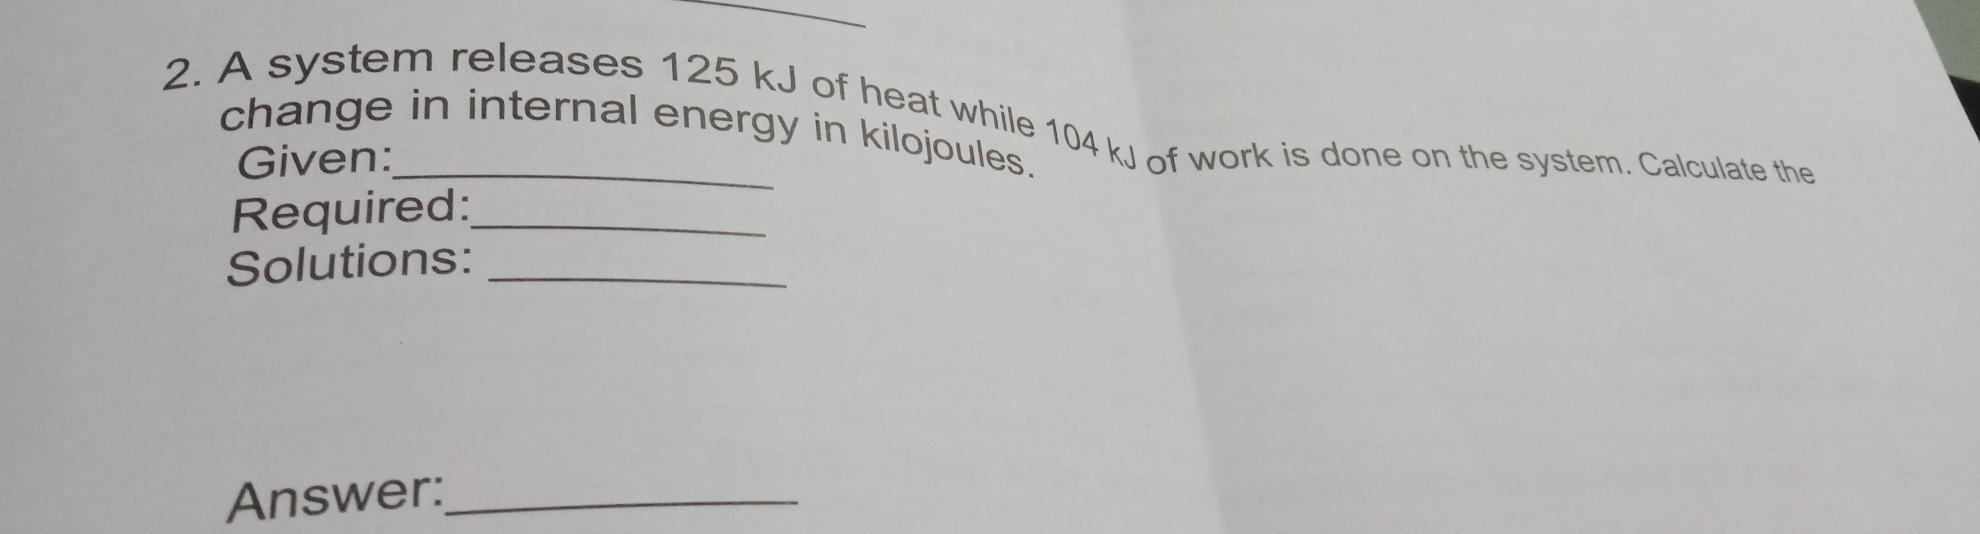 _ 2. A system releases 125 kJ of heat while 104 kJ of work is done on the system. Calculate the change in internal energy in kilojoules. Given: Required: Solutions: Answer: